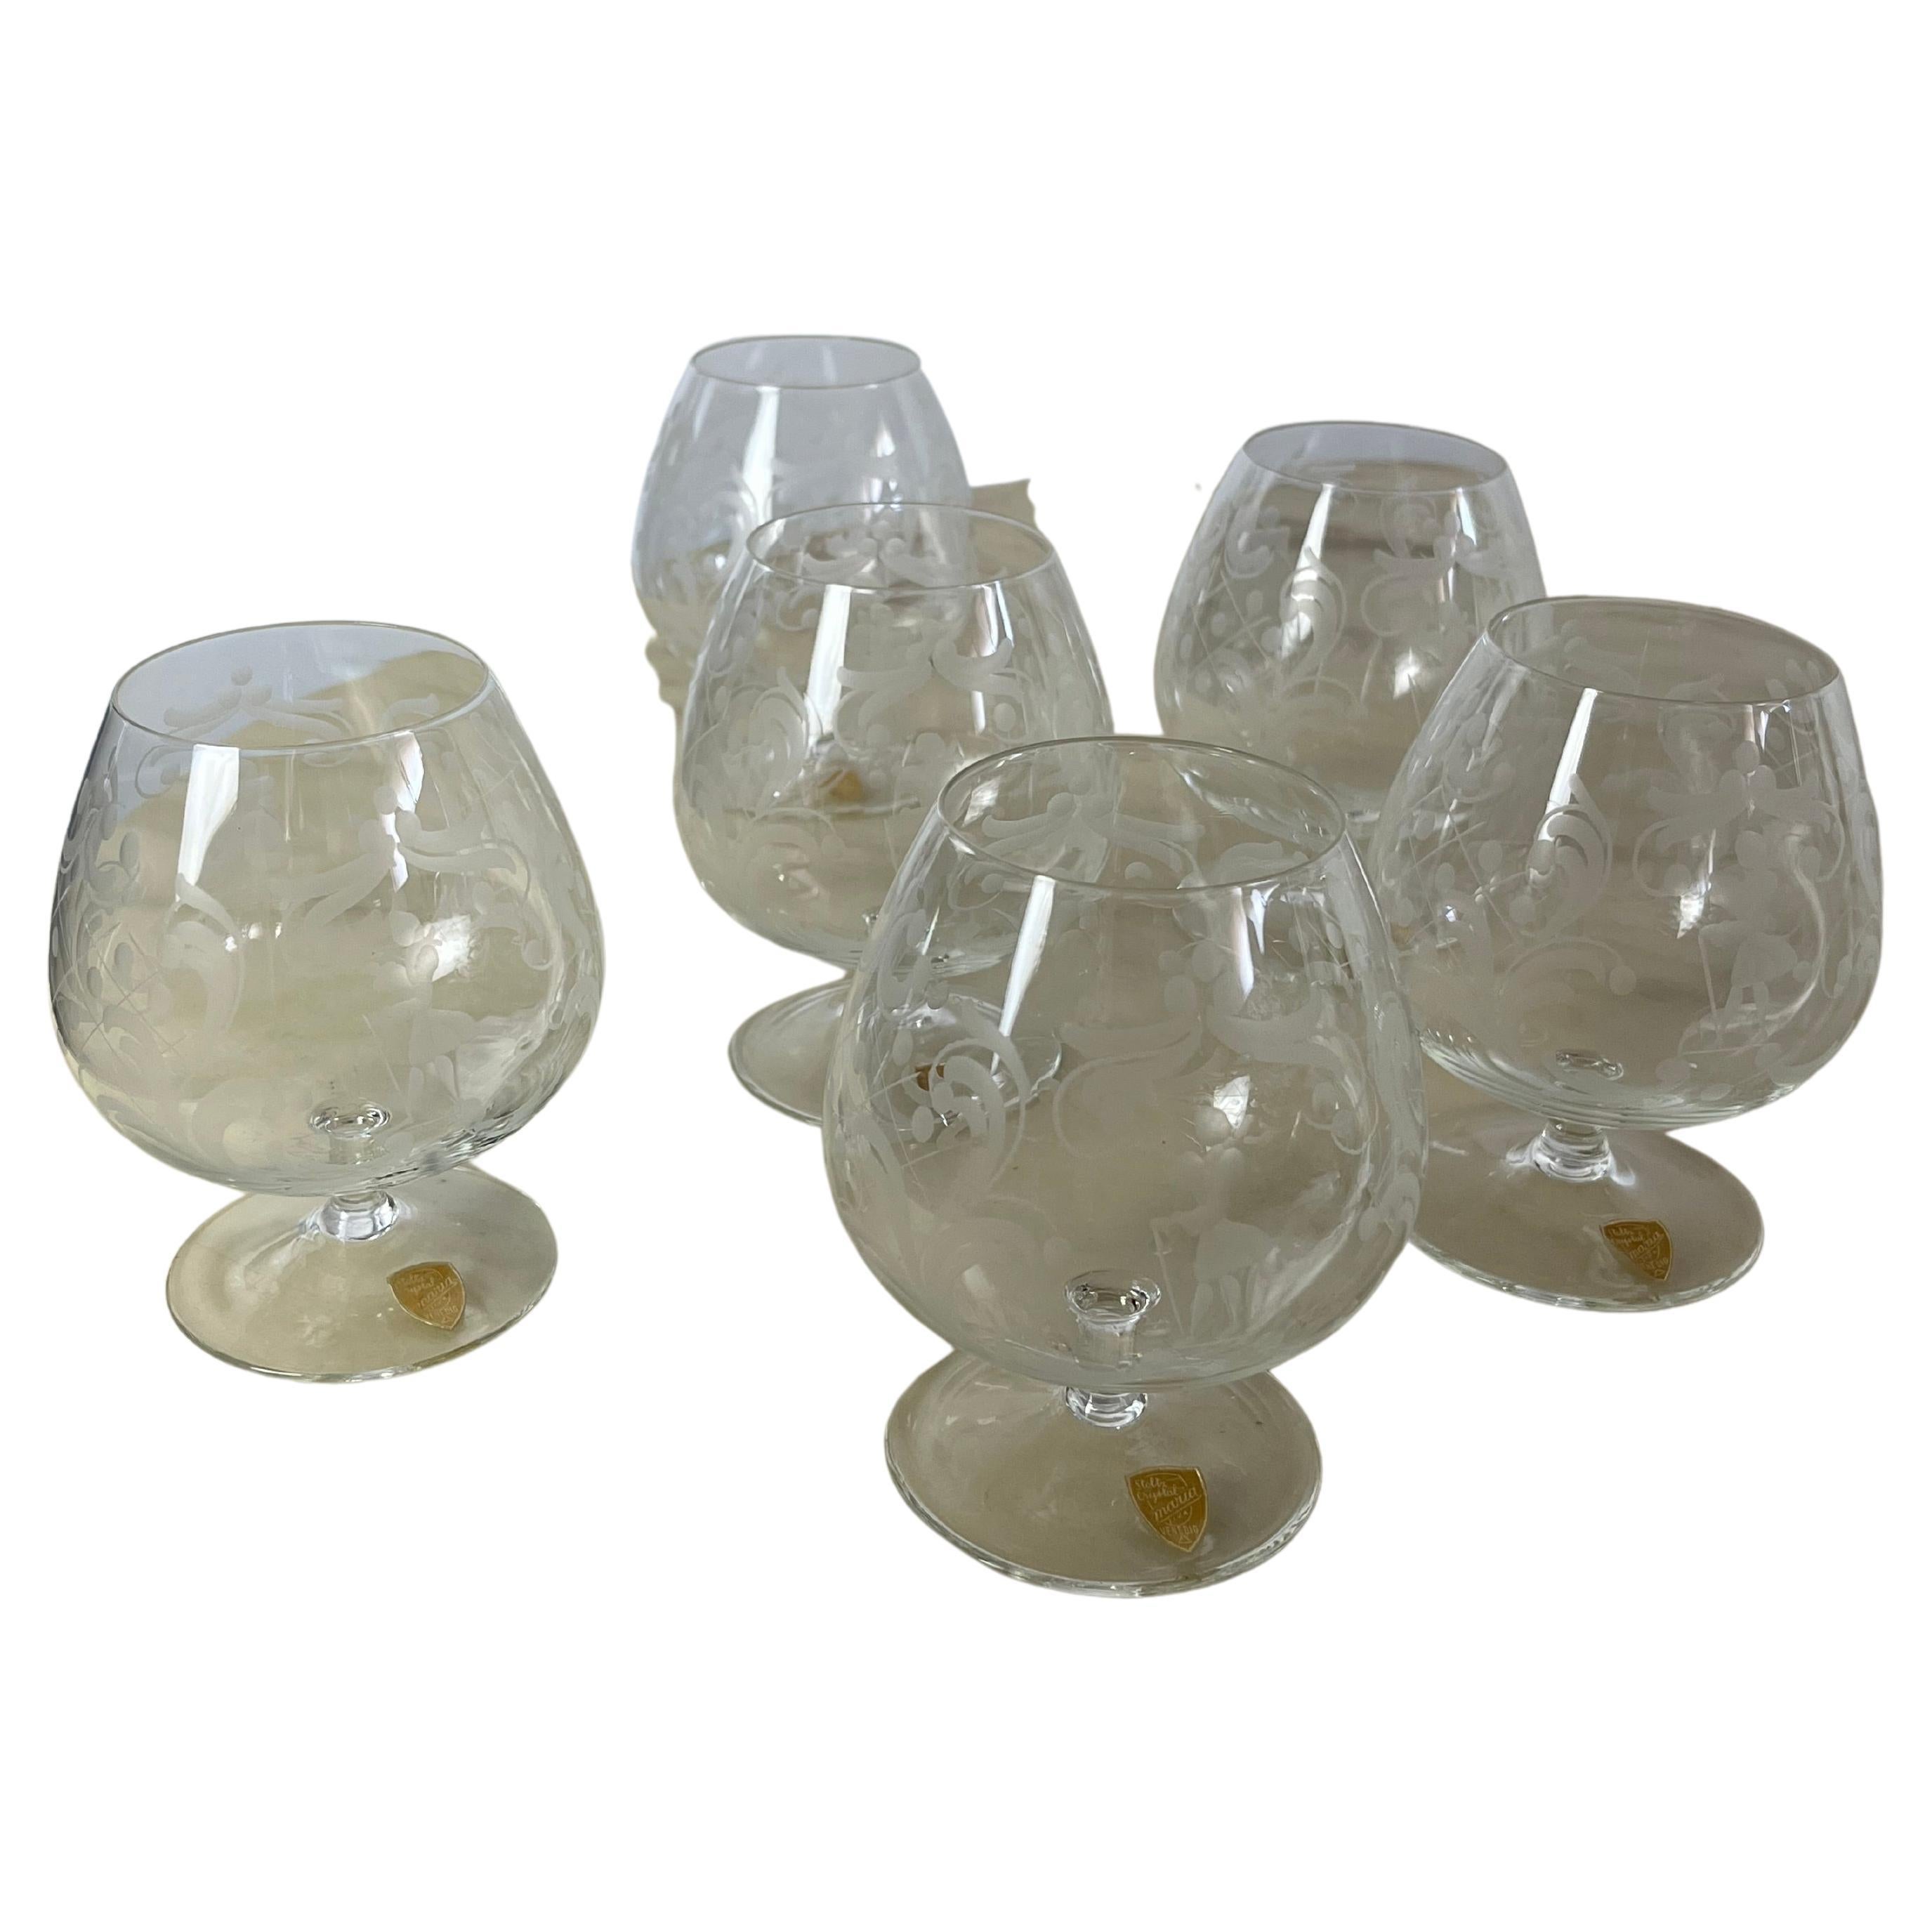 Six Cognac Glasses in Hand-Engraved Crystal, Venice, 1960s For Sale